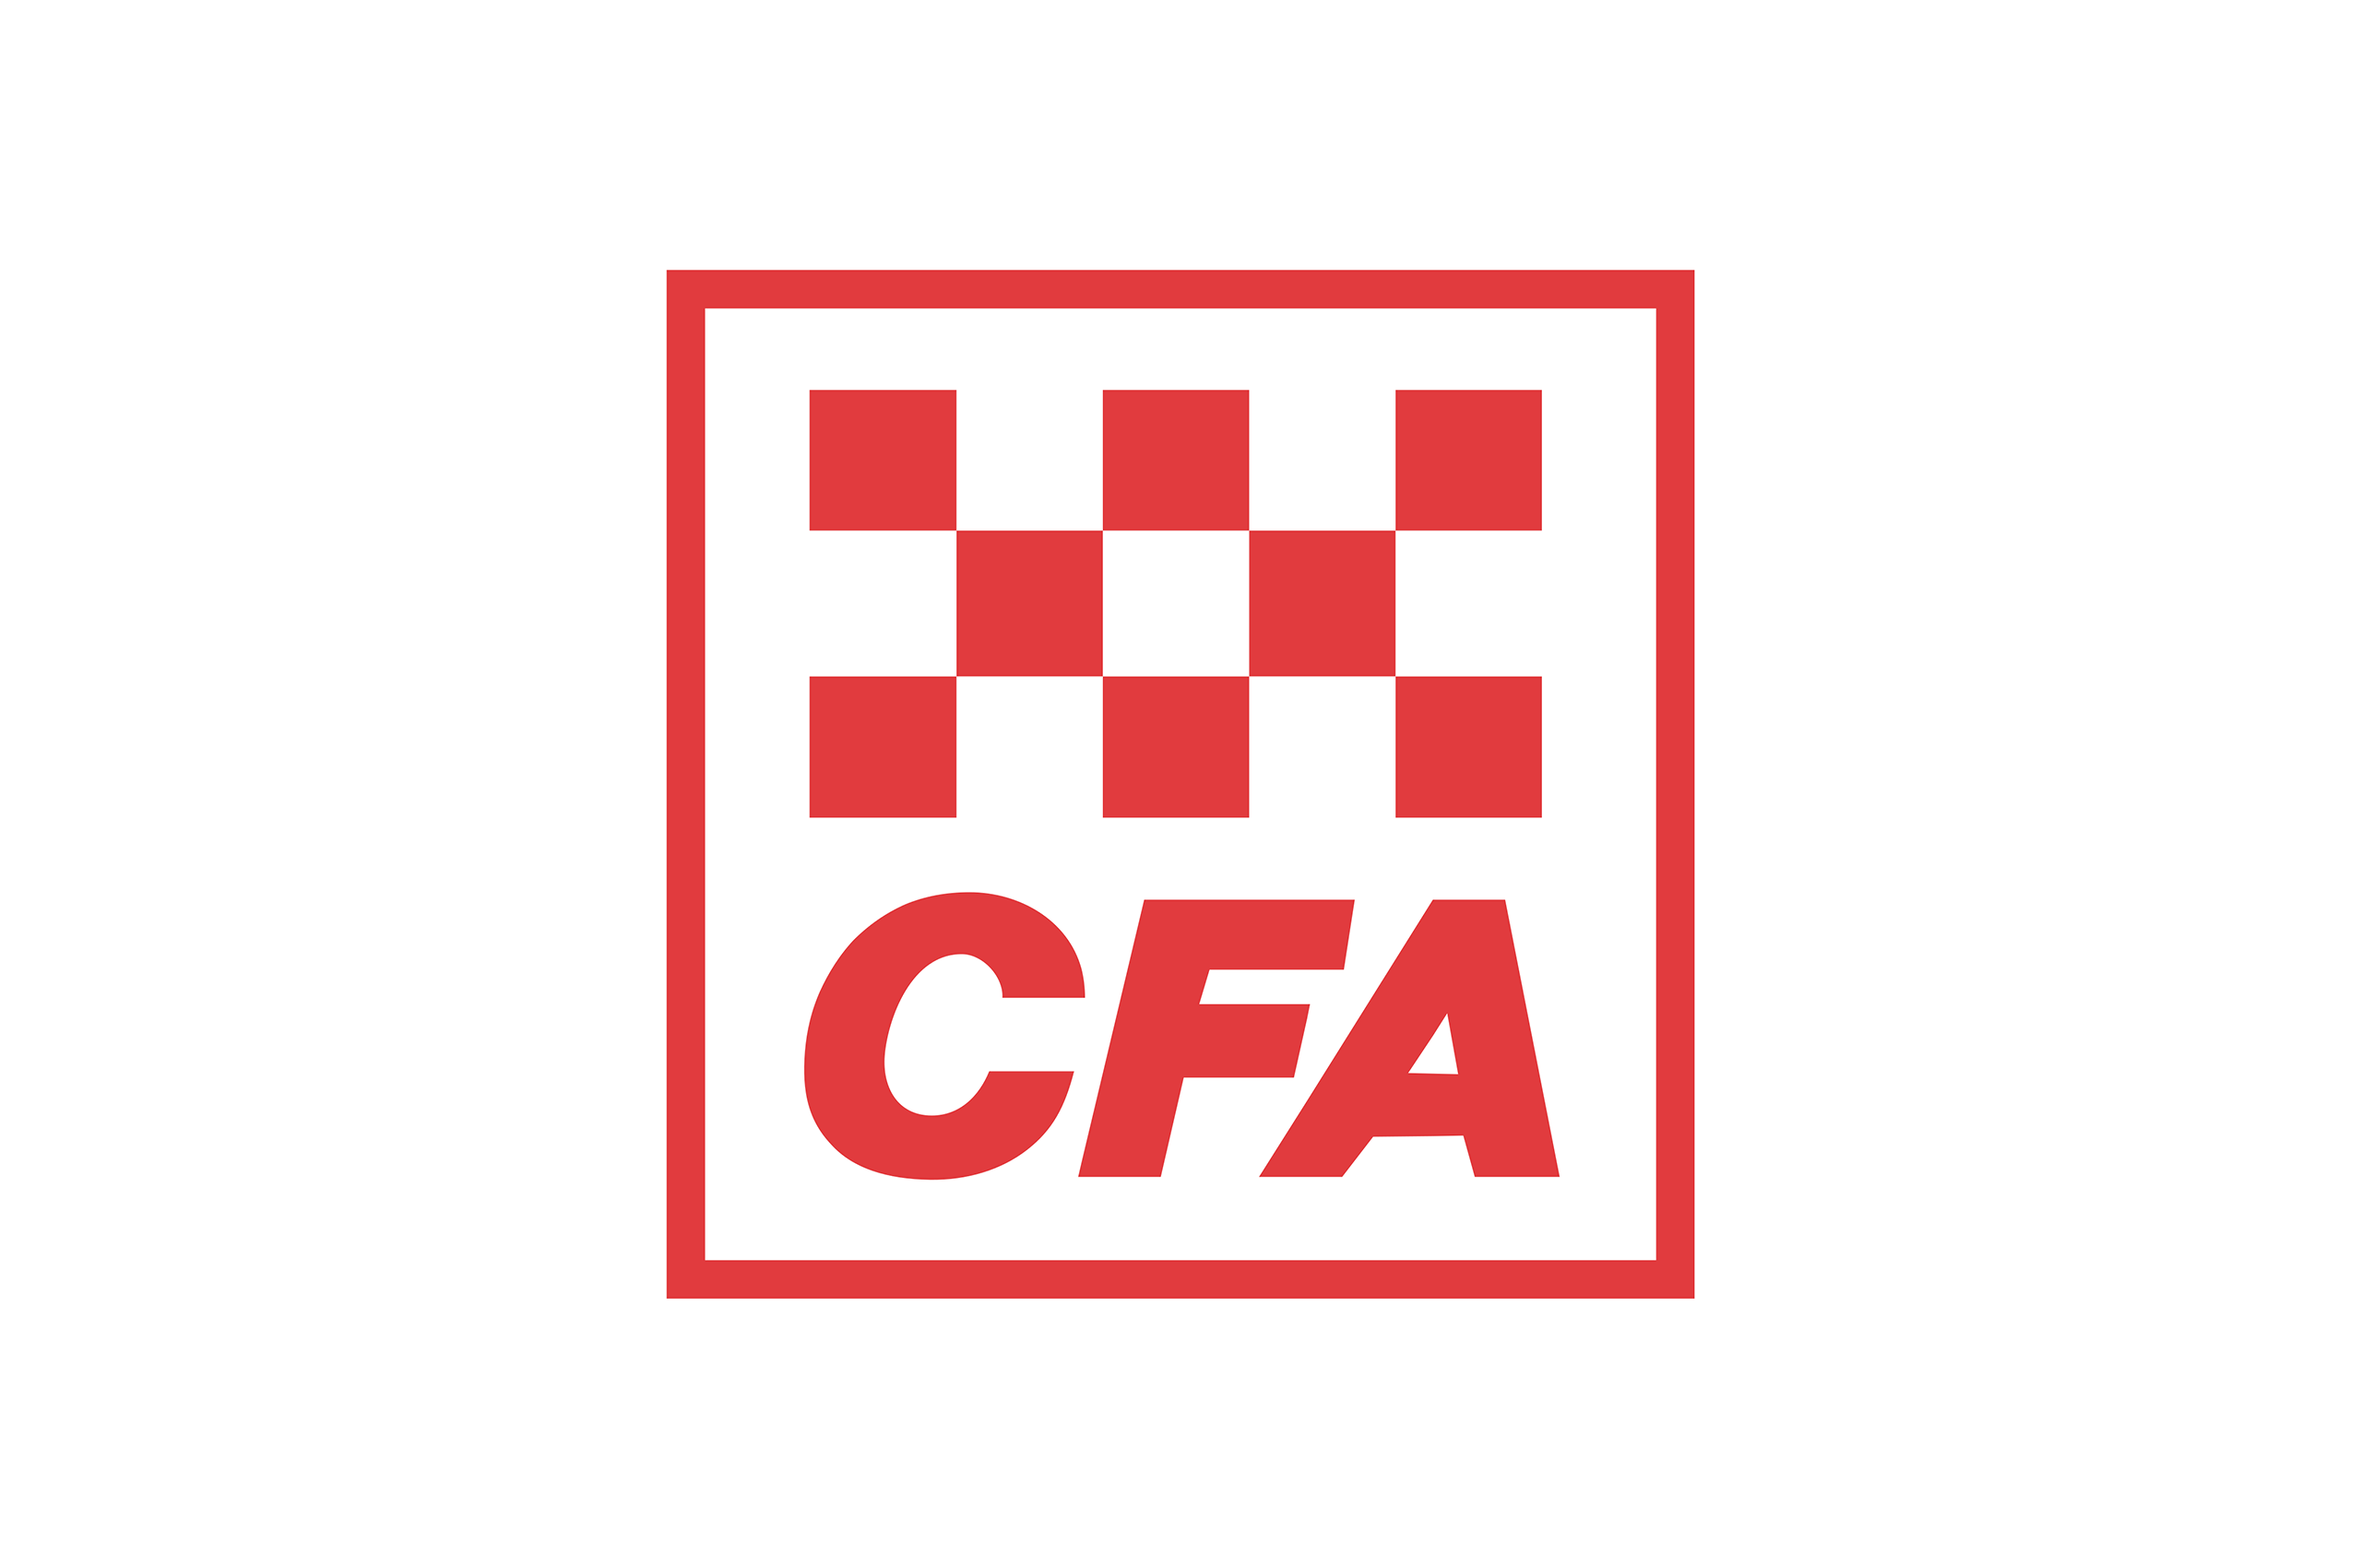 Red and white logo with letters reading CFA.